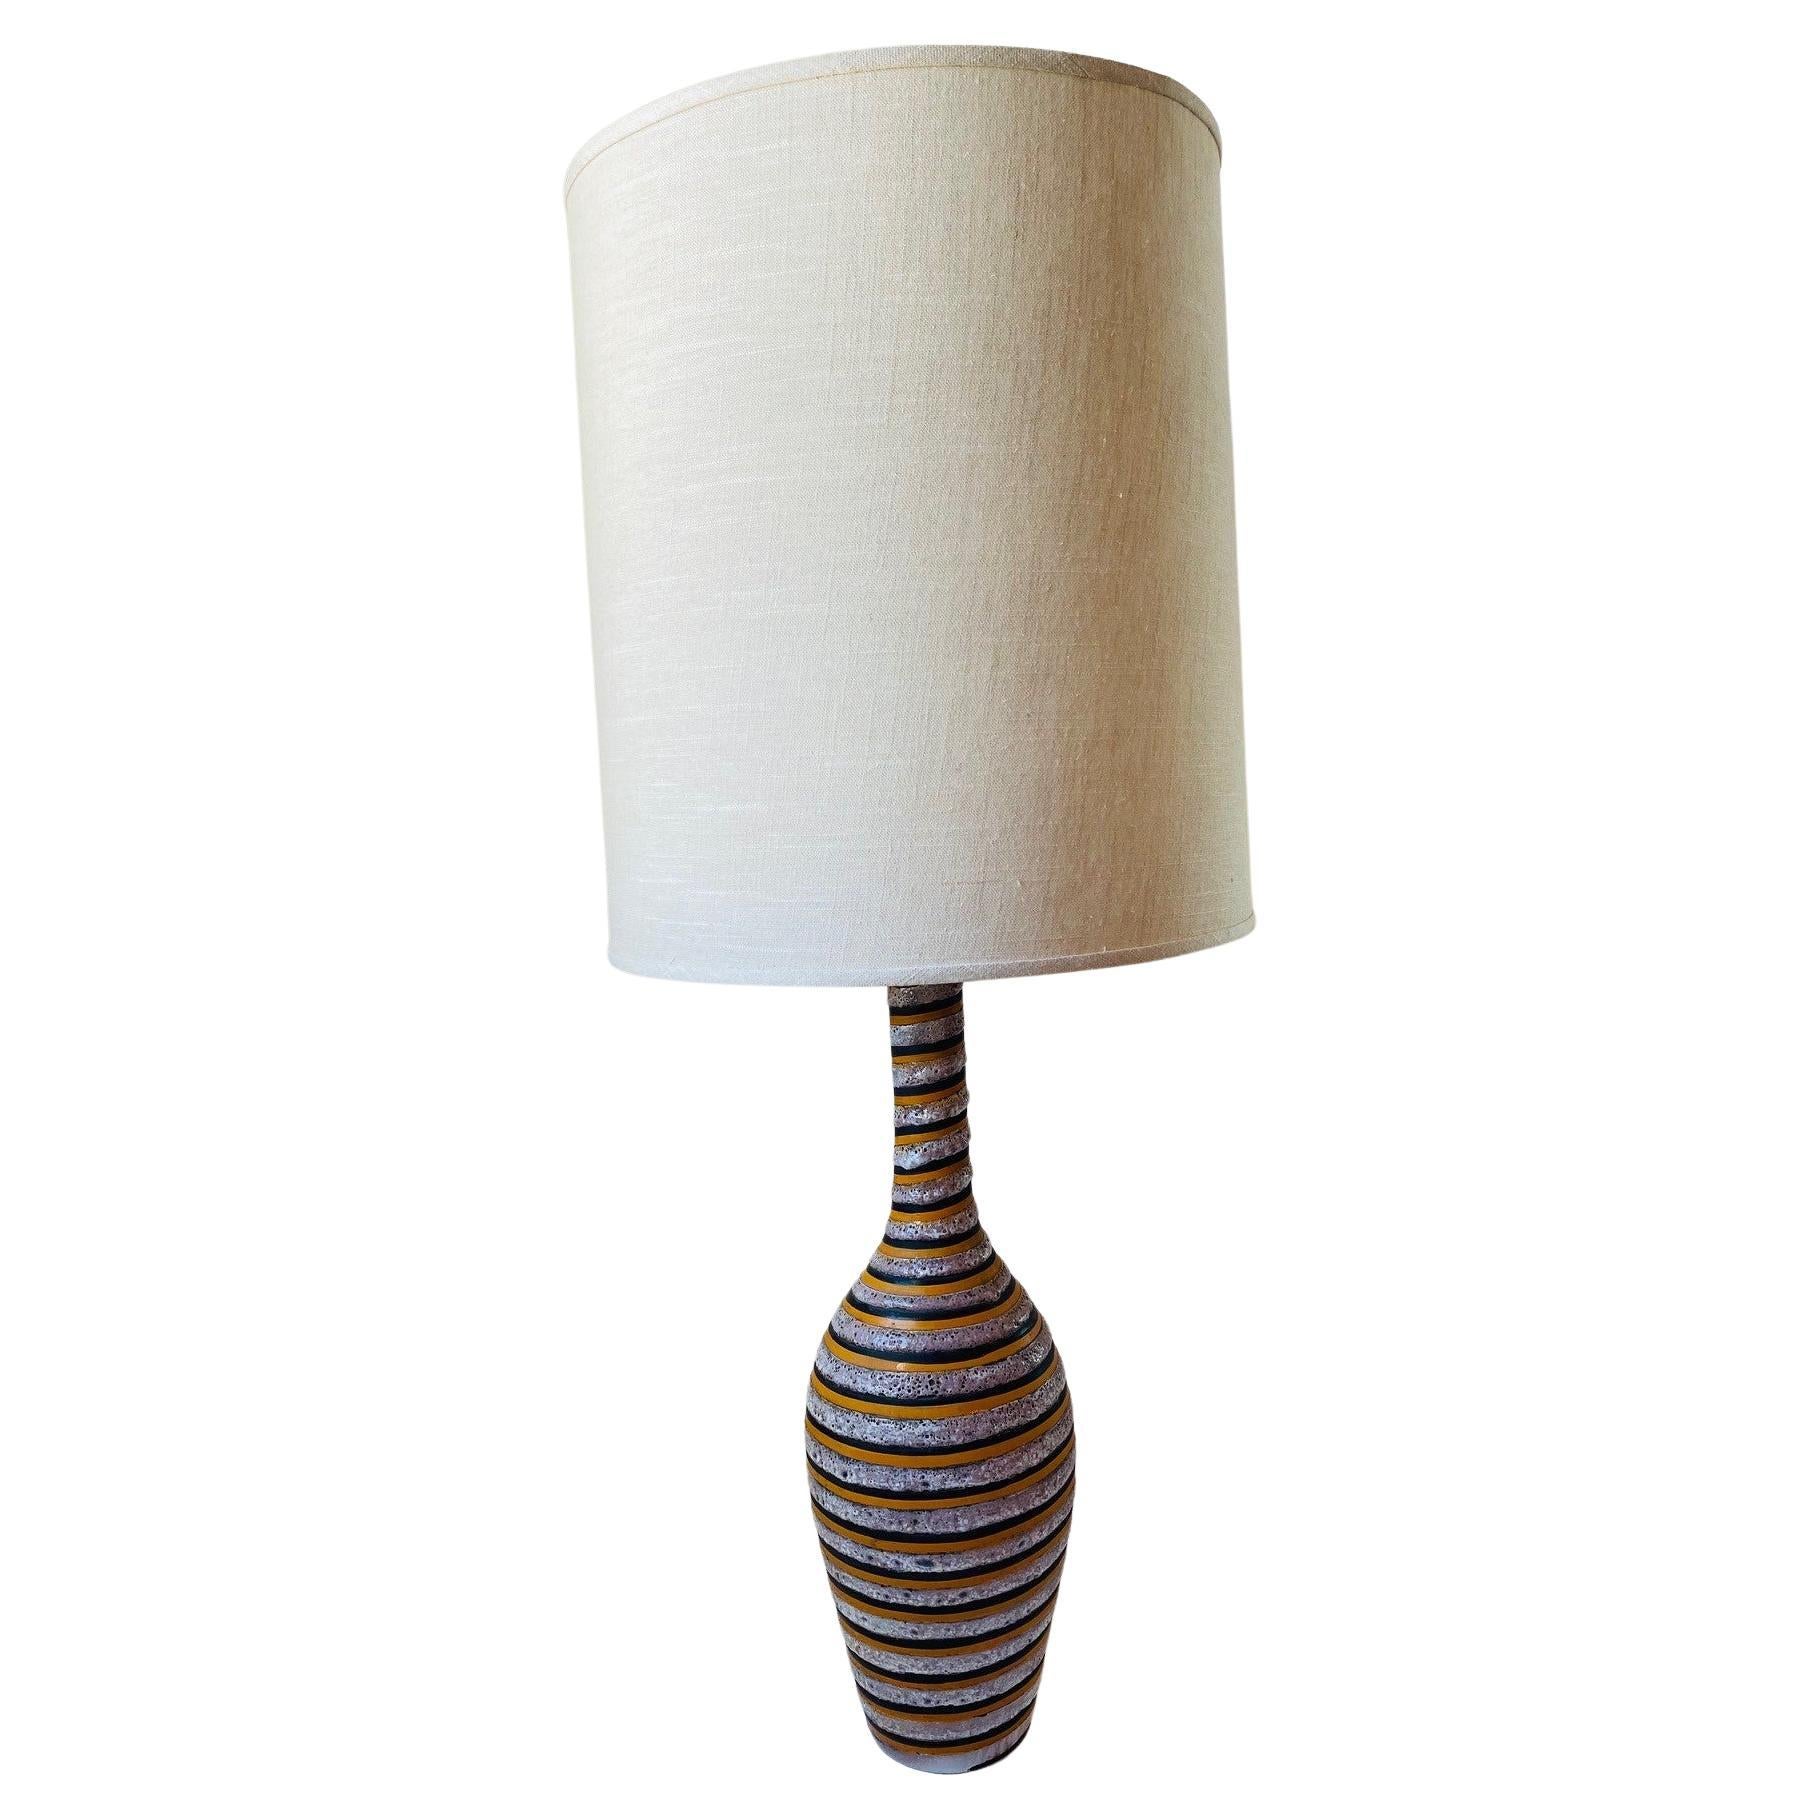 
Outstandingly stylish and rare lamp by Bitossi, made in Italy ca' 1960's. Beautifully crafted by hand, this piece is a work of art elements. Painted swirl strokes of orange brown, contrasting with bulbous texture and volcanic glaze. Simply unique